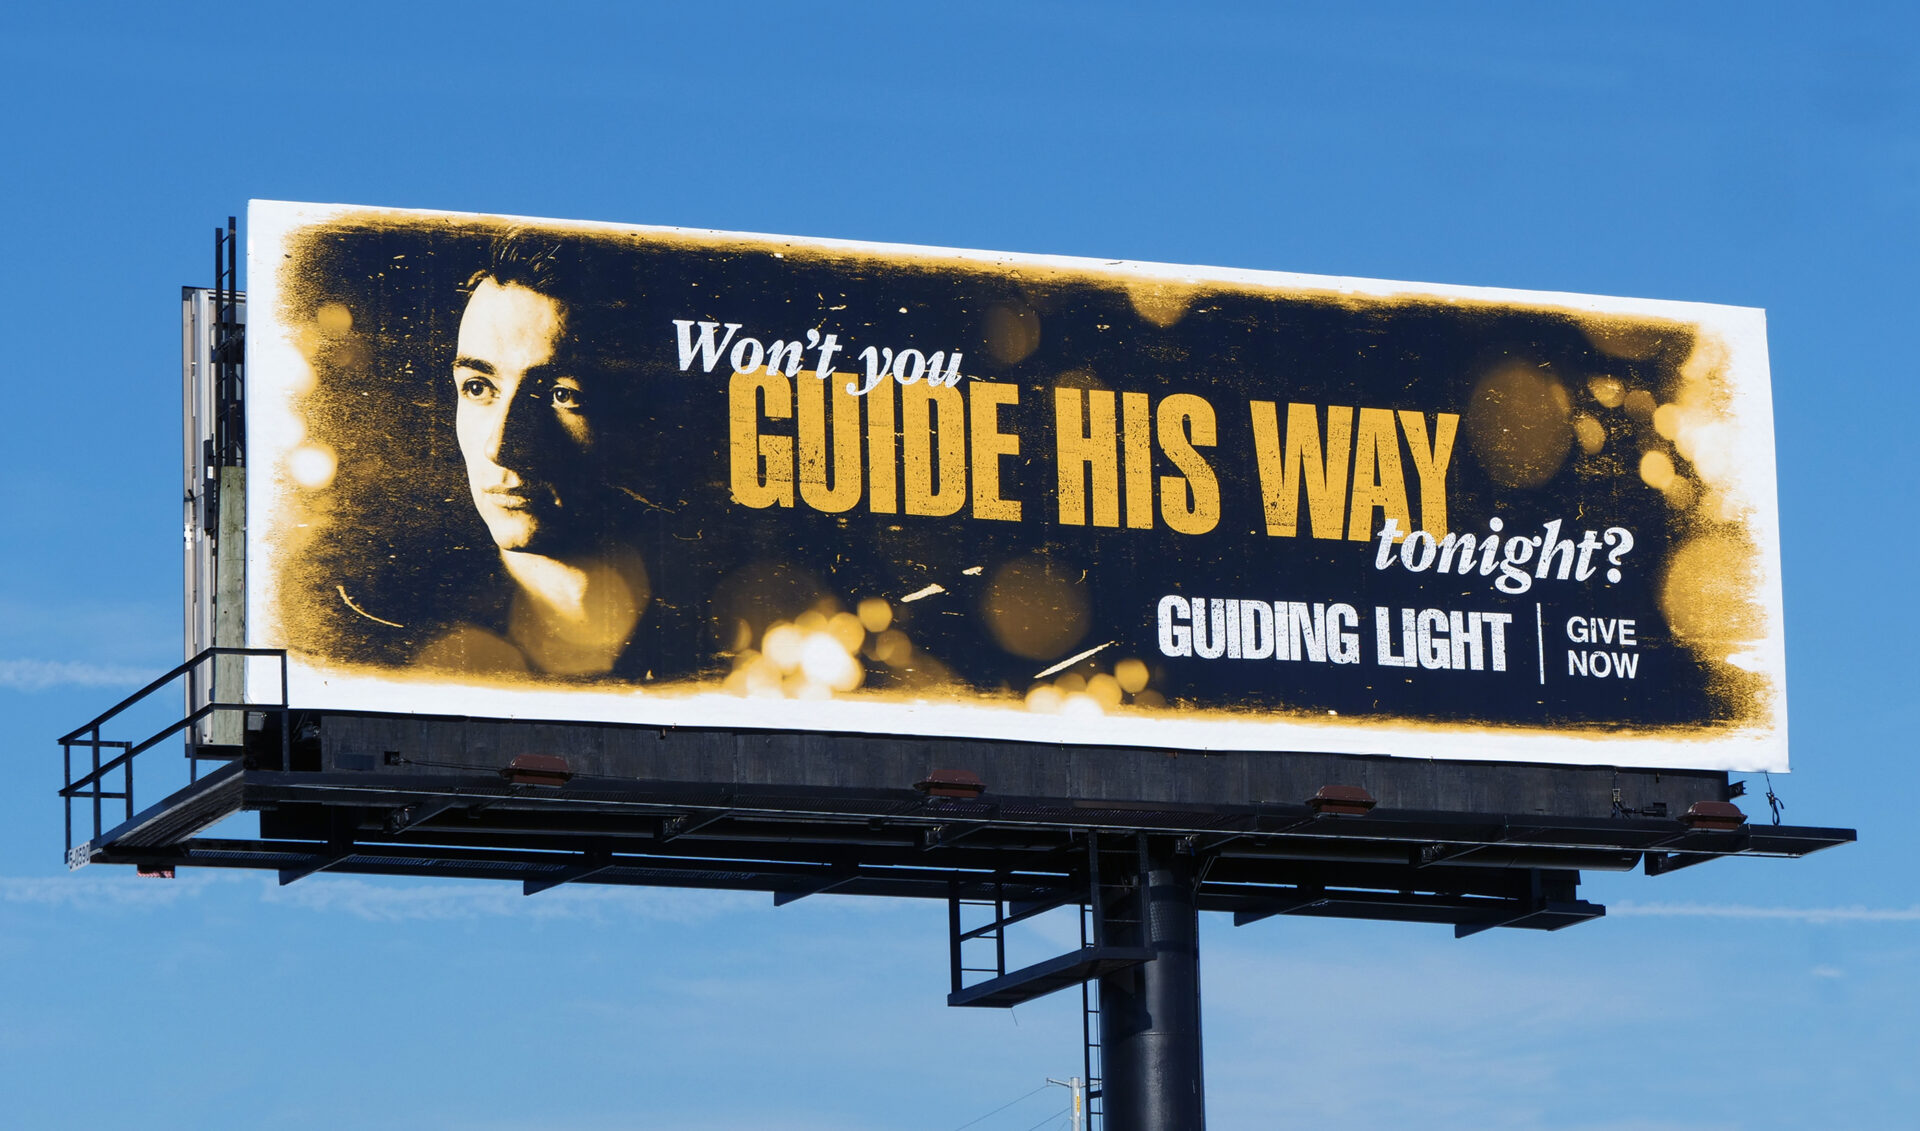 Out of home bulletin for Guiding Light. Won't you guide his way tonight?